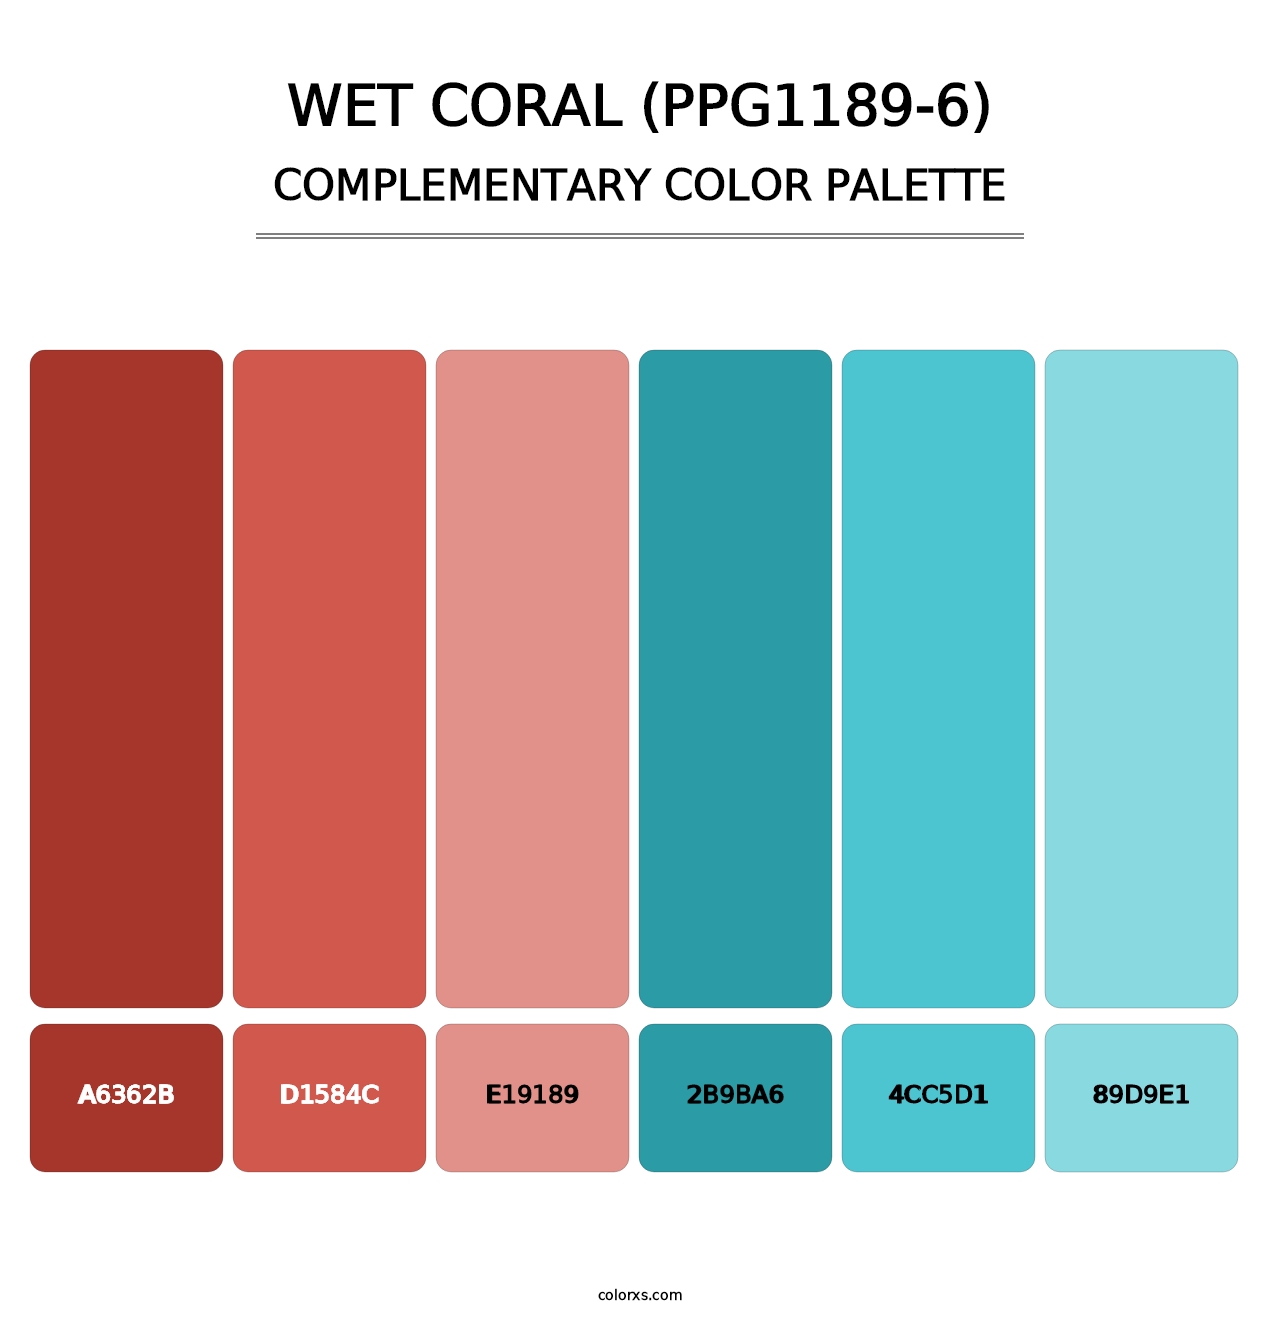 Wet Coral (PPG1189-6) - Complementary Color Palette